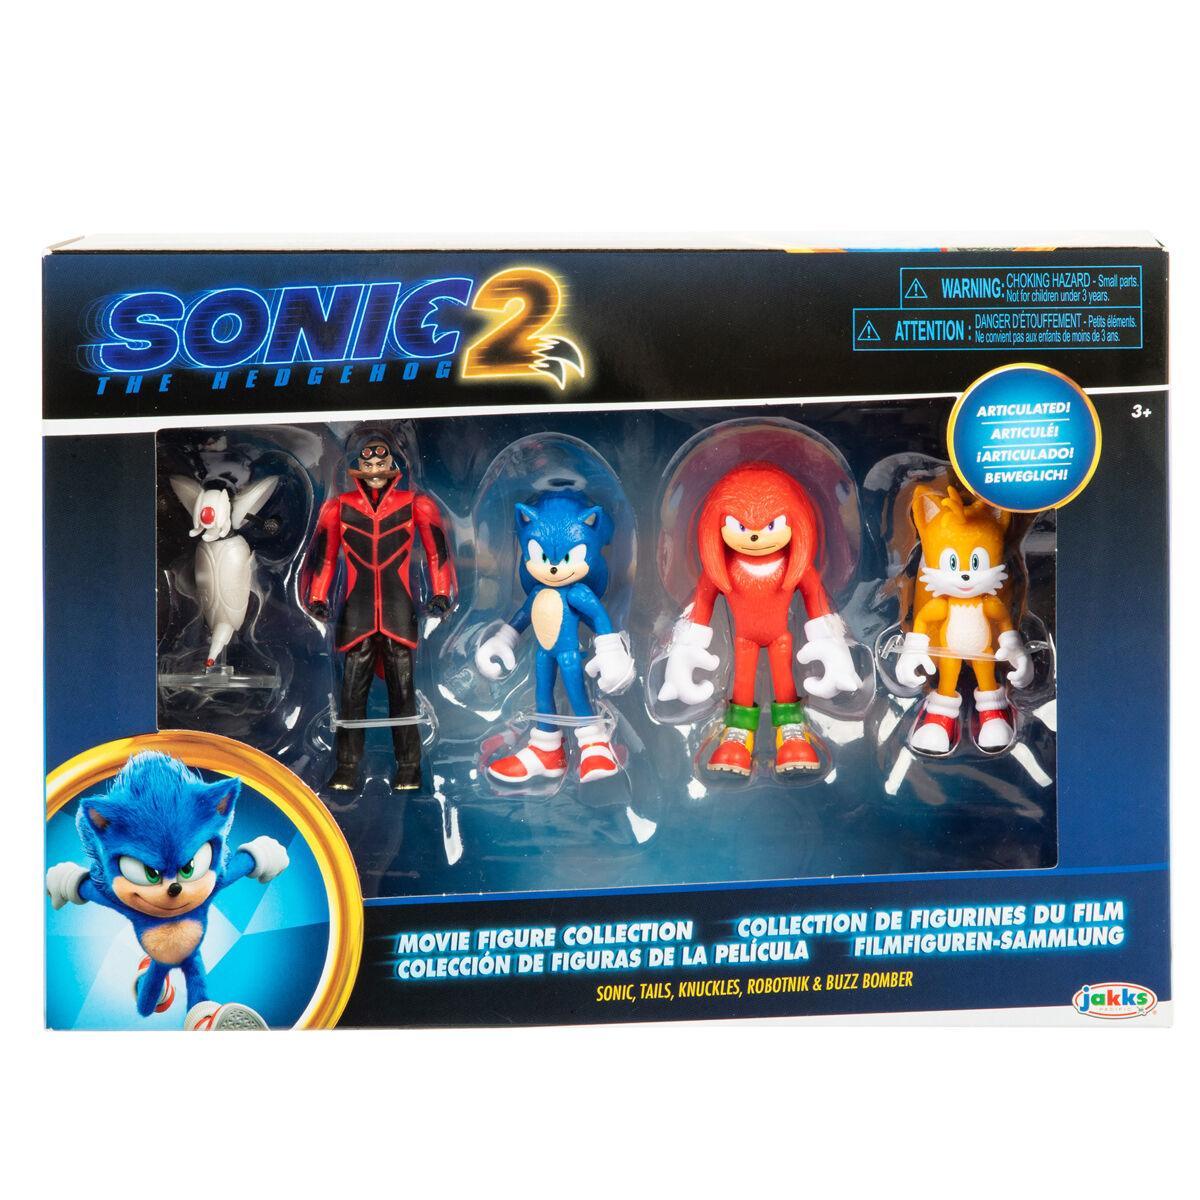 Sonic the Hedgehog 4 Action Figure 2 Pack Classic Sonic & Classic Mighty 